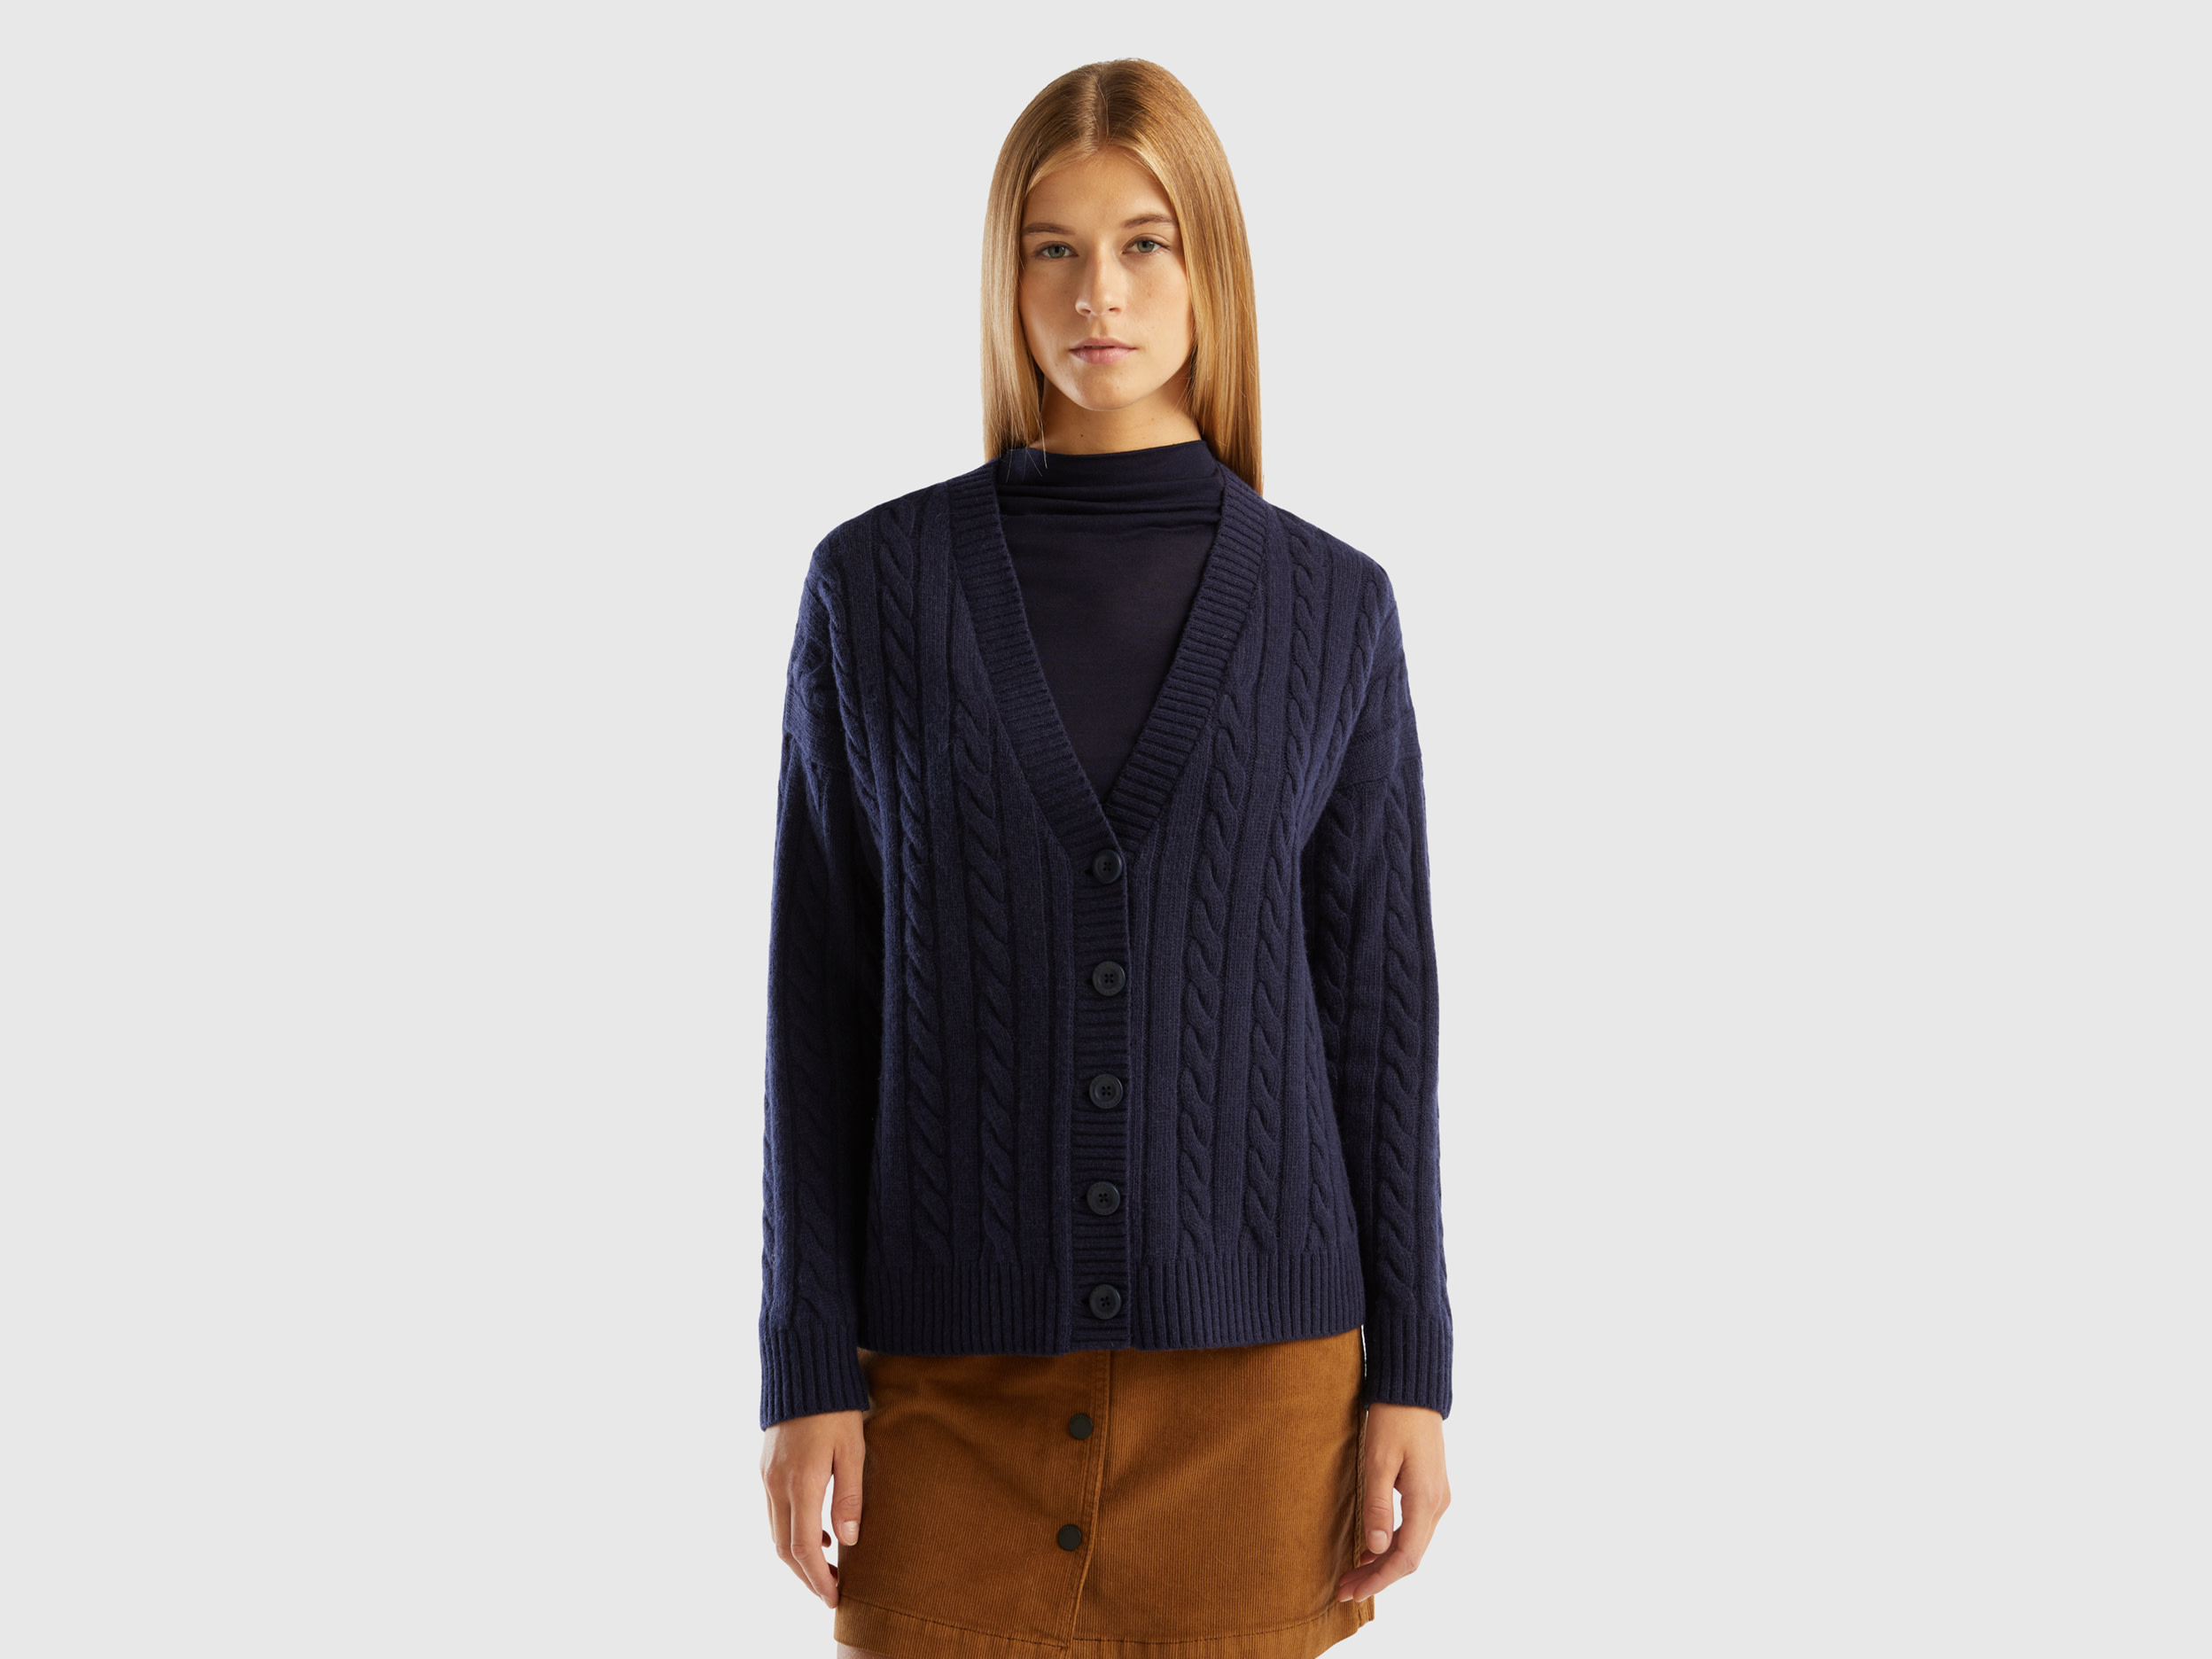 Benetton, Oversized Fit Cardigan With Cables, size L-XL, Dark Blue, Women